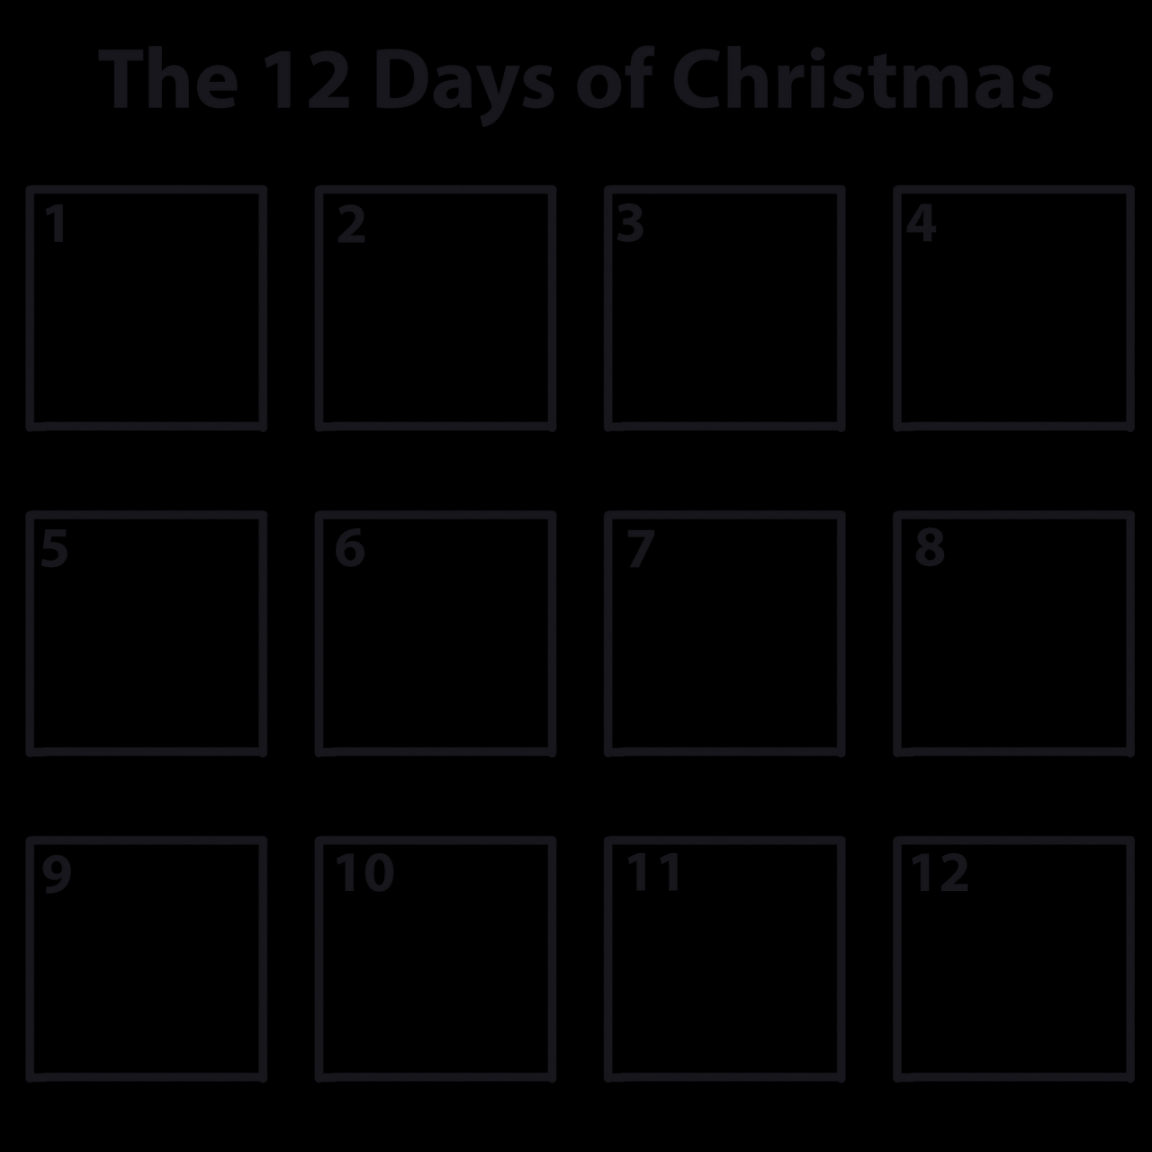 Days of Christmas Template by dmcmusiclover on DeviantArt